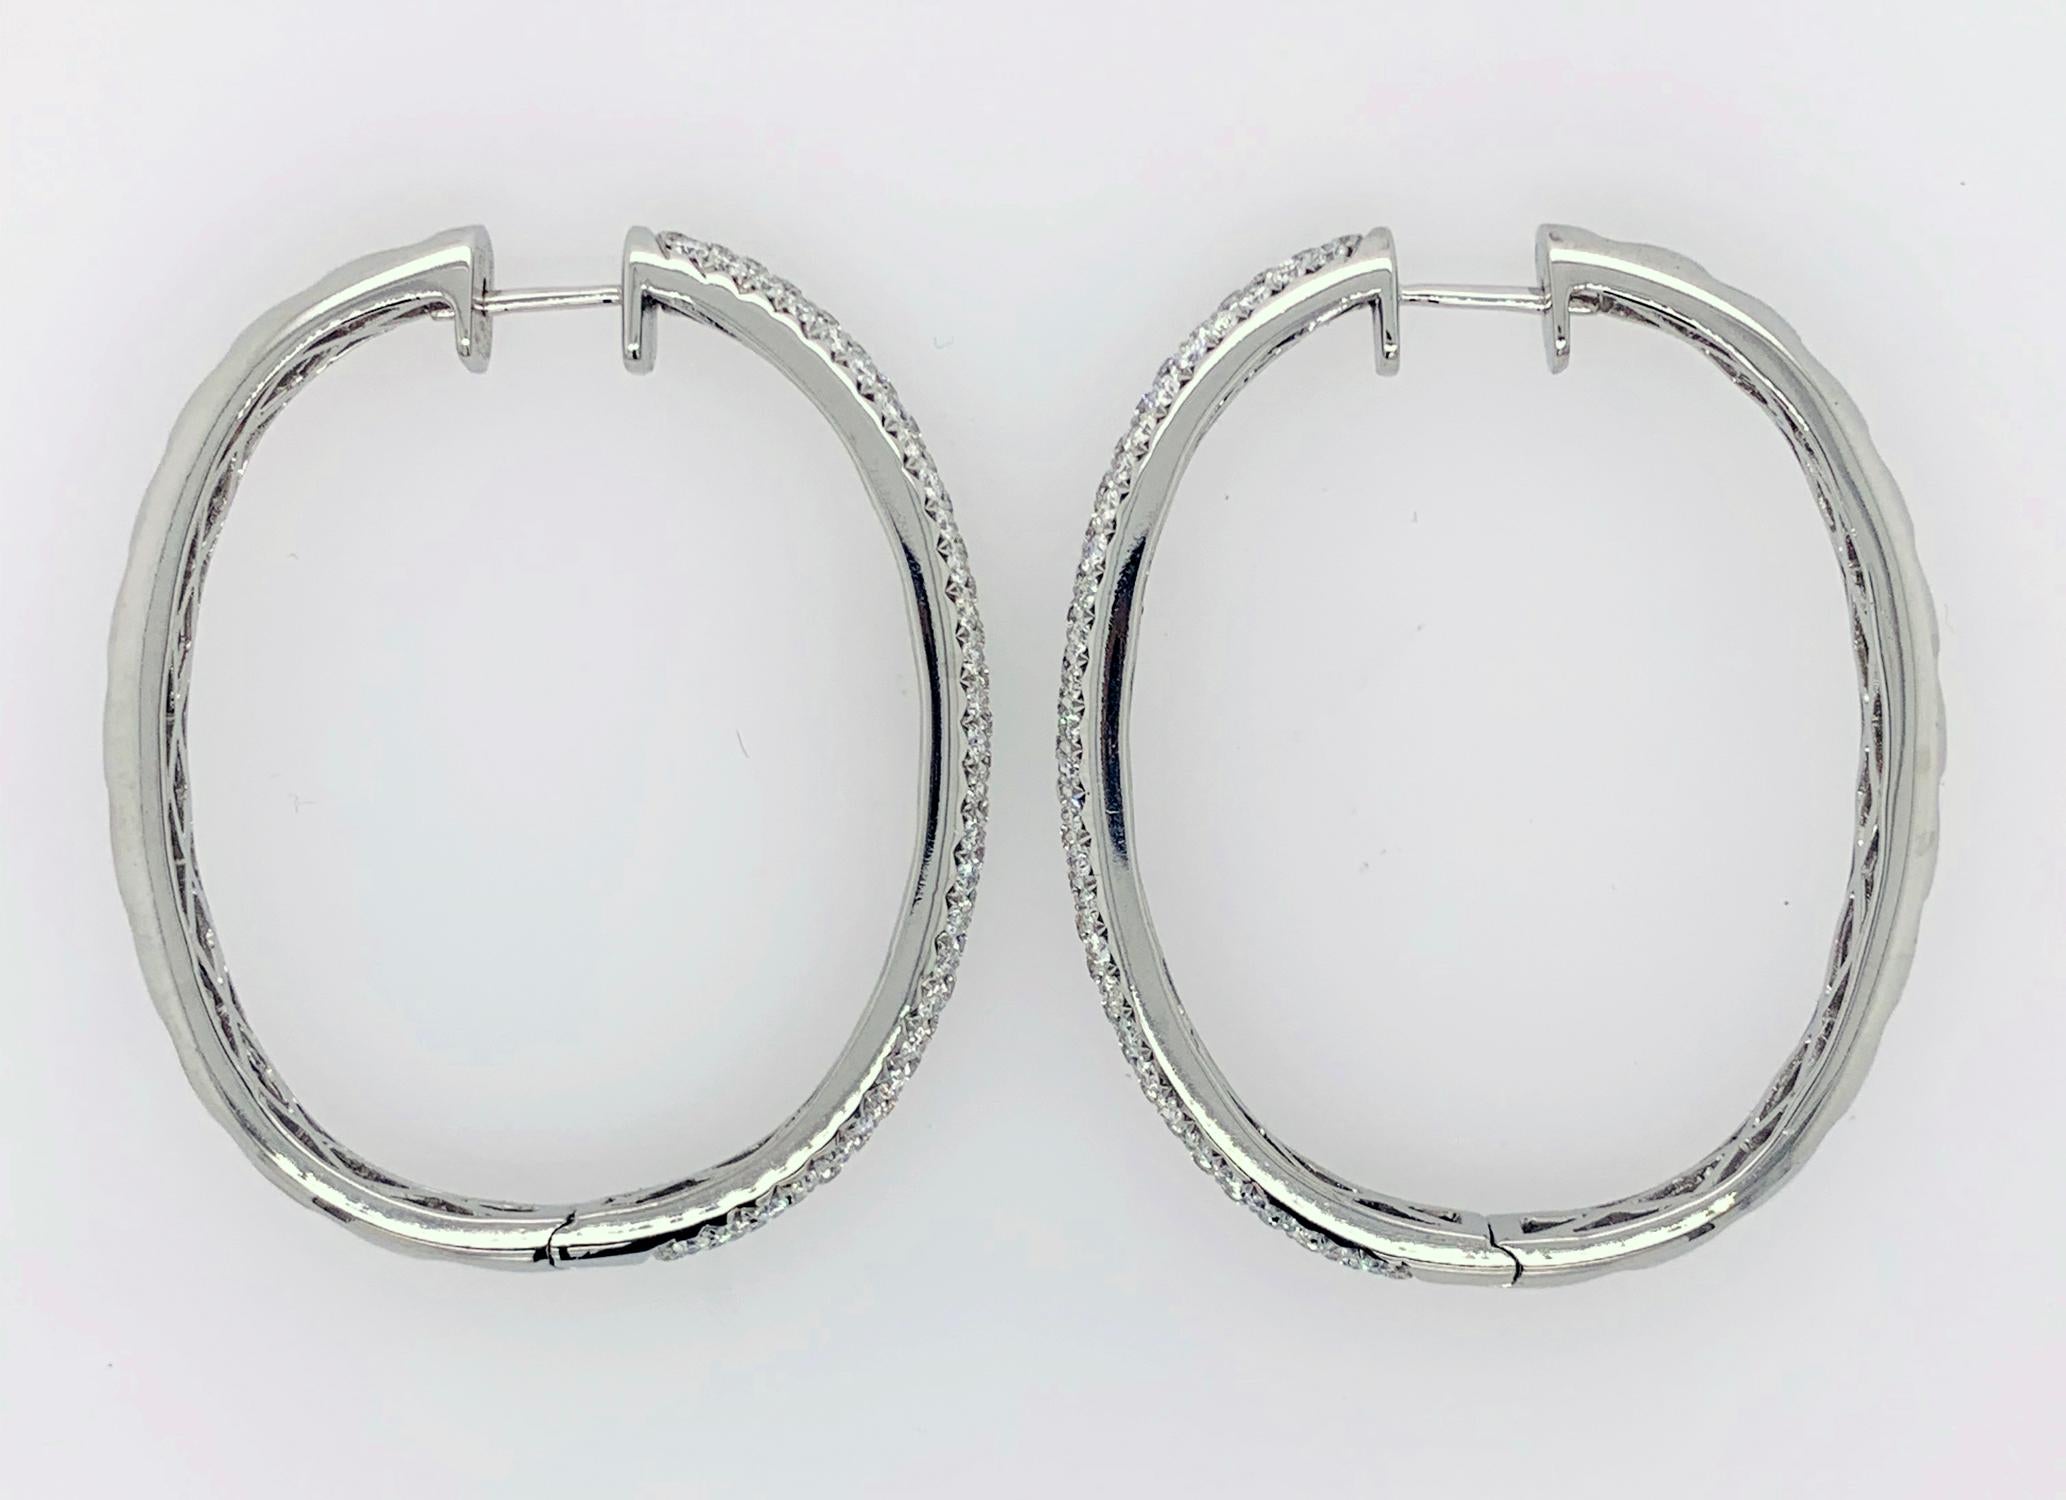 Diamond Hoop Earrings In Excellent Condition For Sale In Carmel, CA